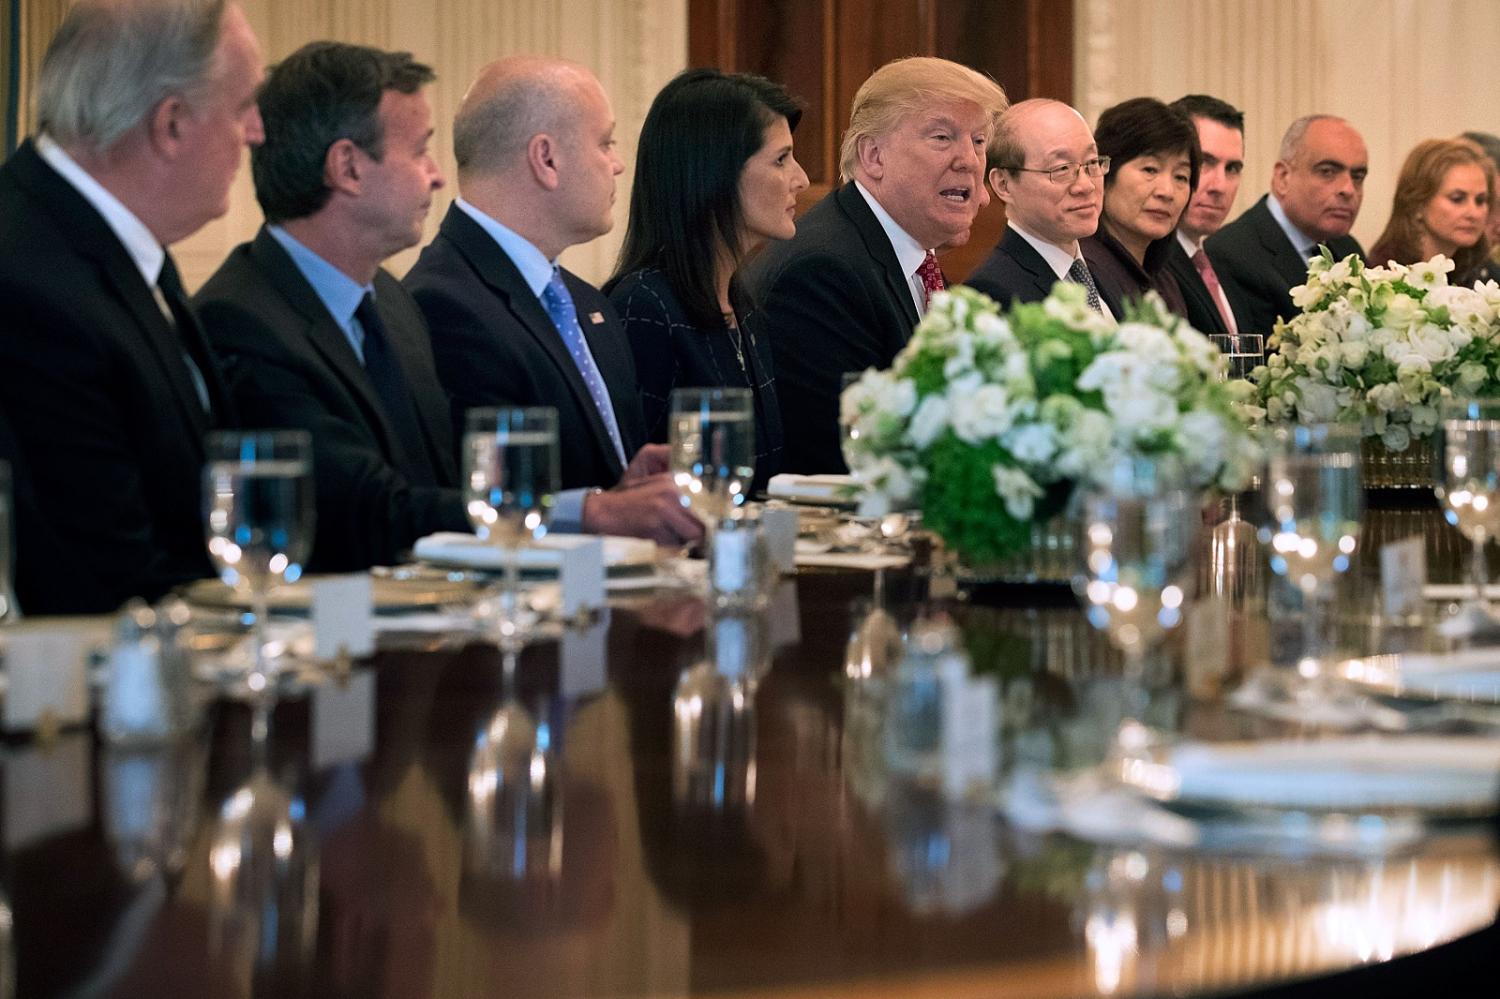 President Trump with the US Ambassador to the UN Nikki Haley and other UN Security Council members at the White House in April (Photo: Chip Somodevilla/Getty Images